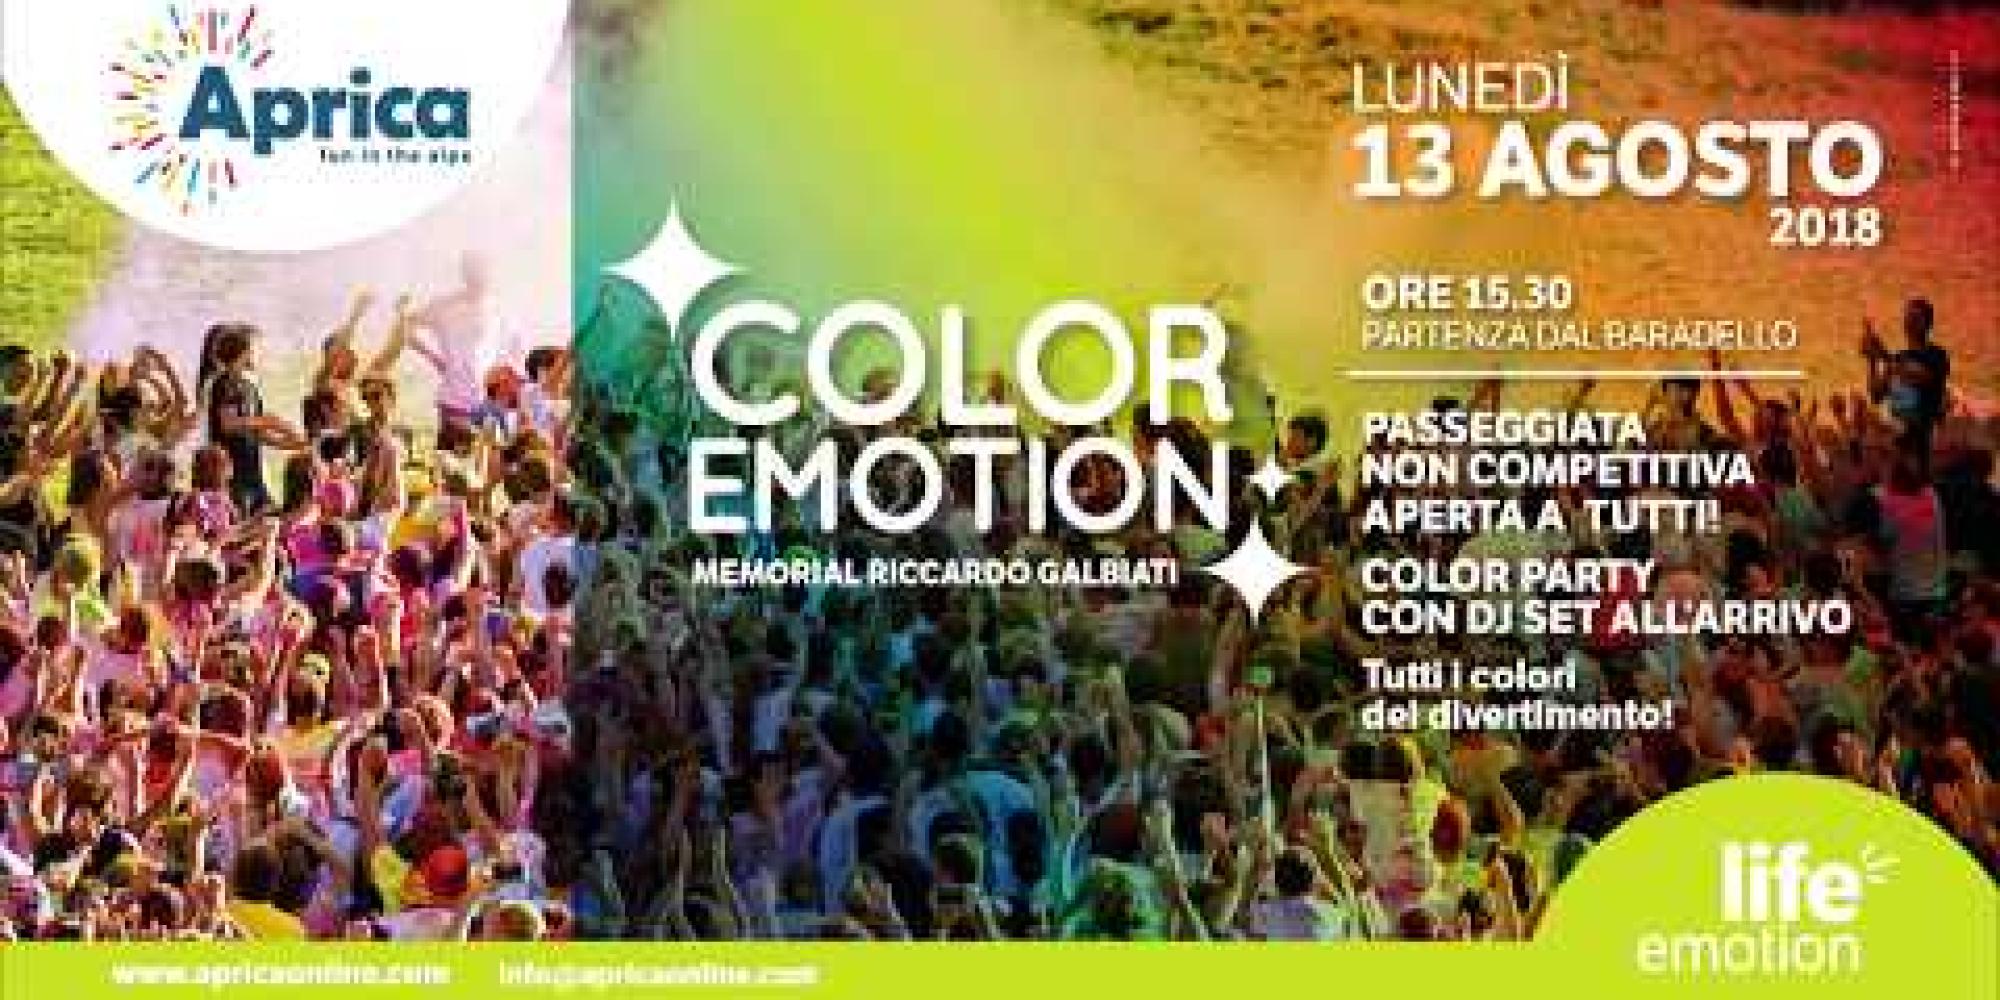 Embedded thumbnail for Aprica color emotion- Spot lancio 2018